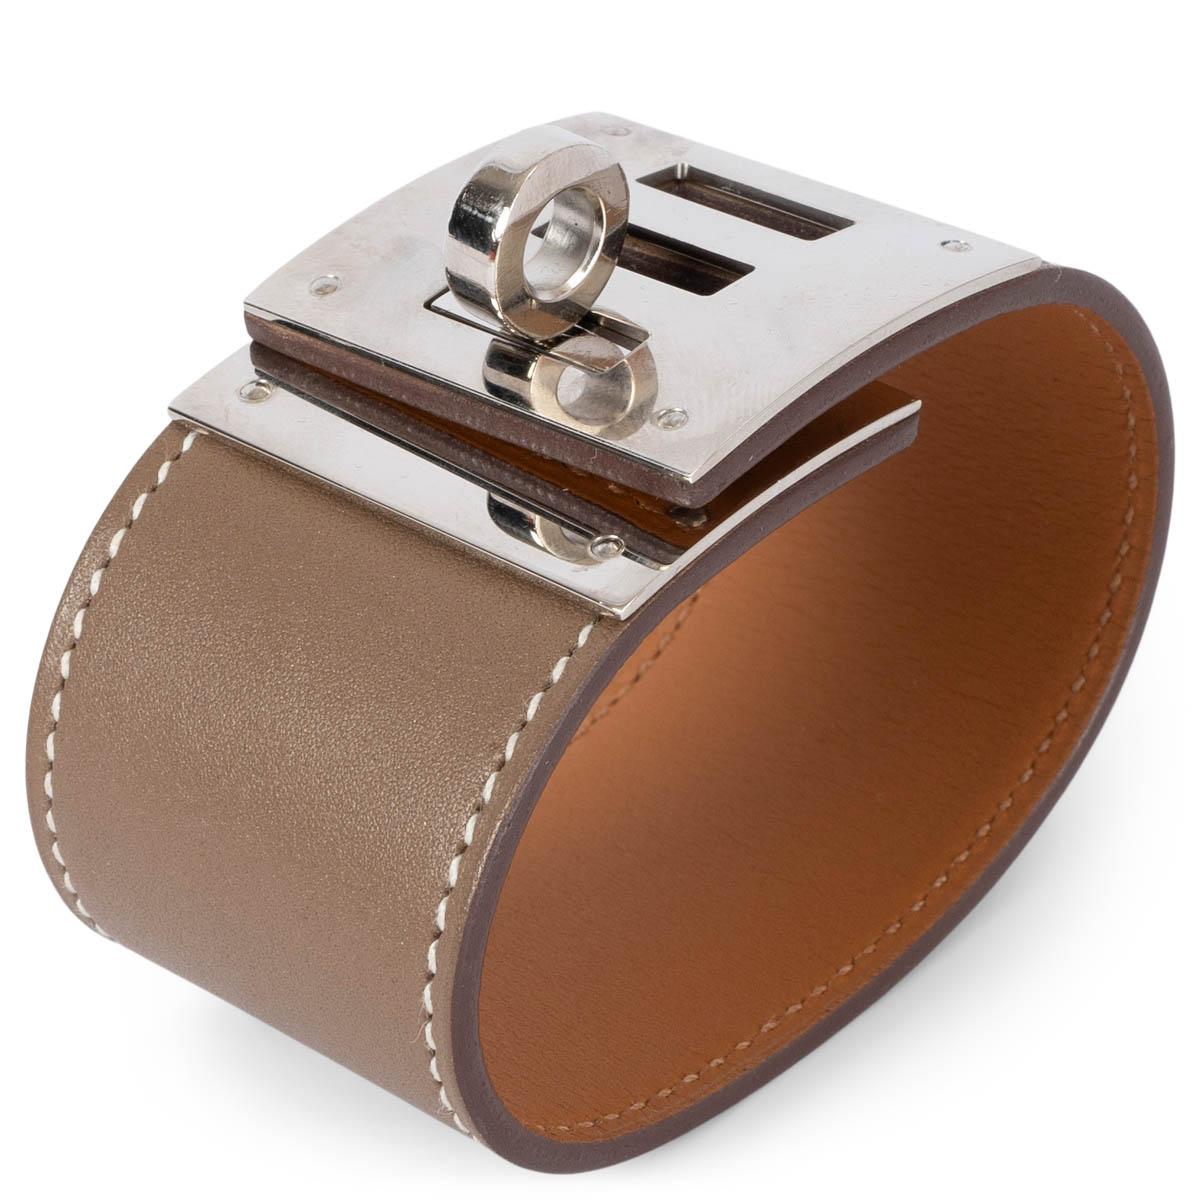 100% authentic Hermès Kelly Dog Extreme cuff bracelet in Etoupe (taupe) Swift leather featuring contrasting white stitching and Palladium hardware. Has been worn and and is in excellent condition. Comes with velvet pouch and box.

Measurements
Tag